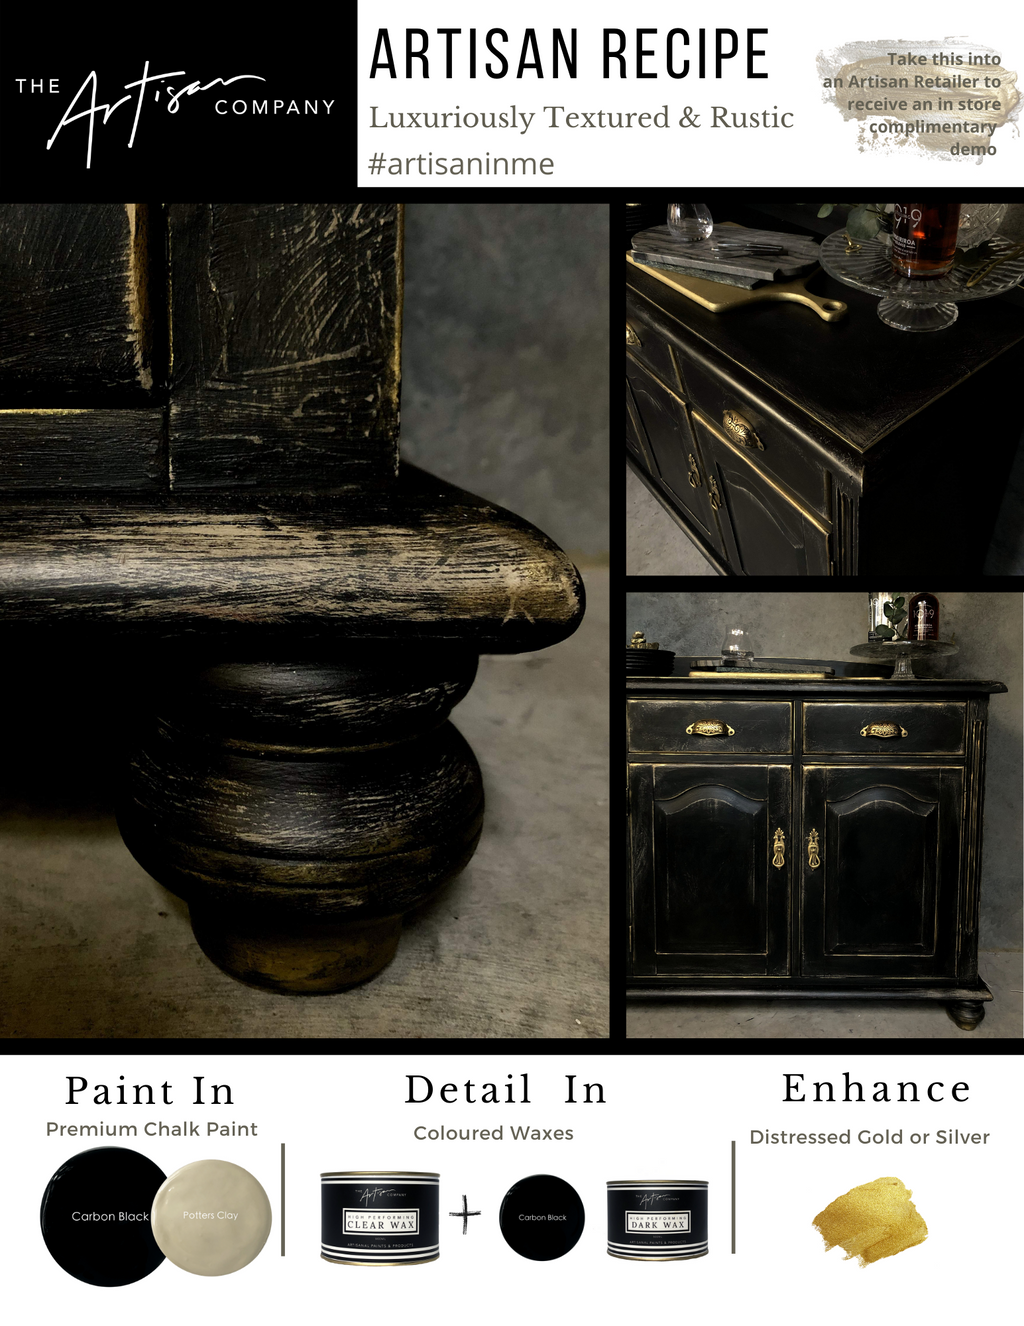 Artisan Paint Recipe Luxuriously Textured & Rustic